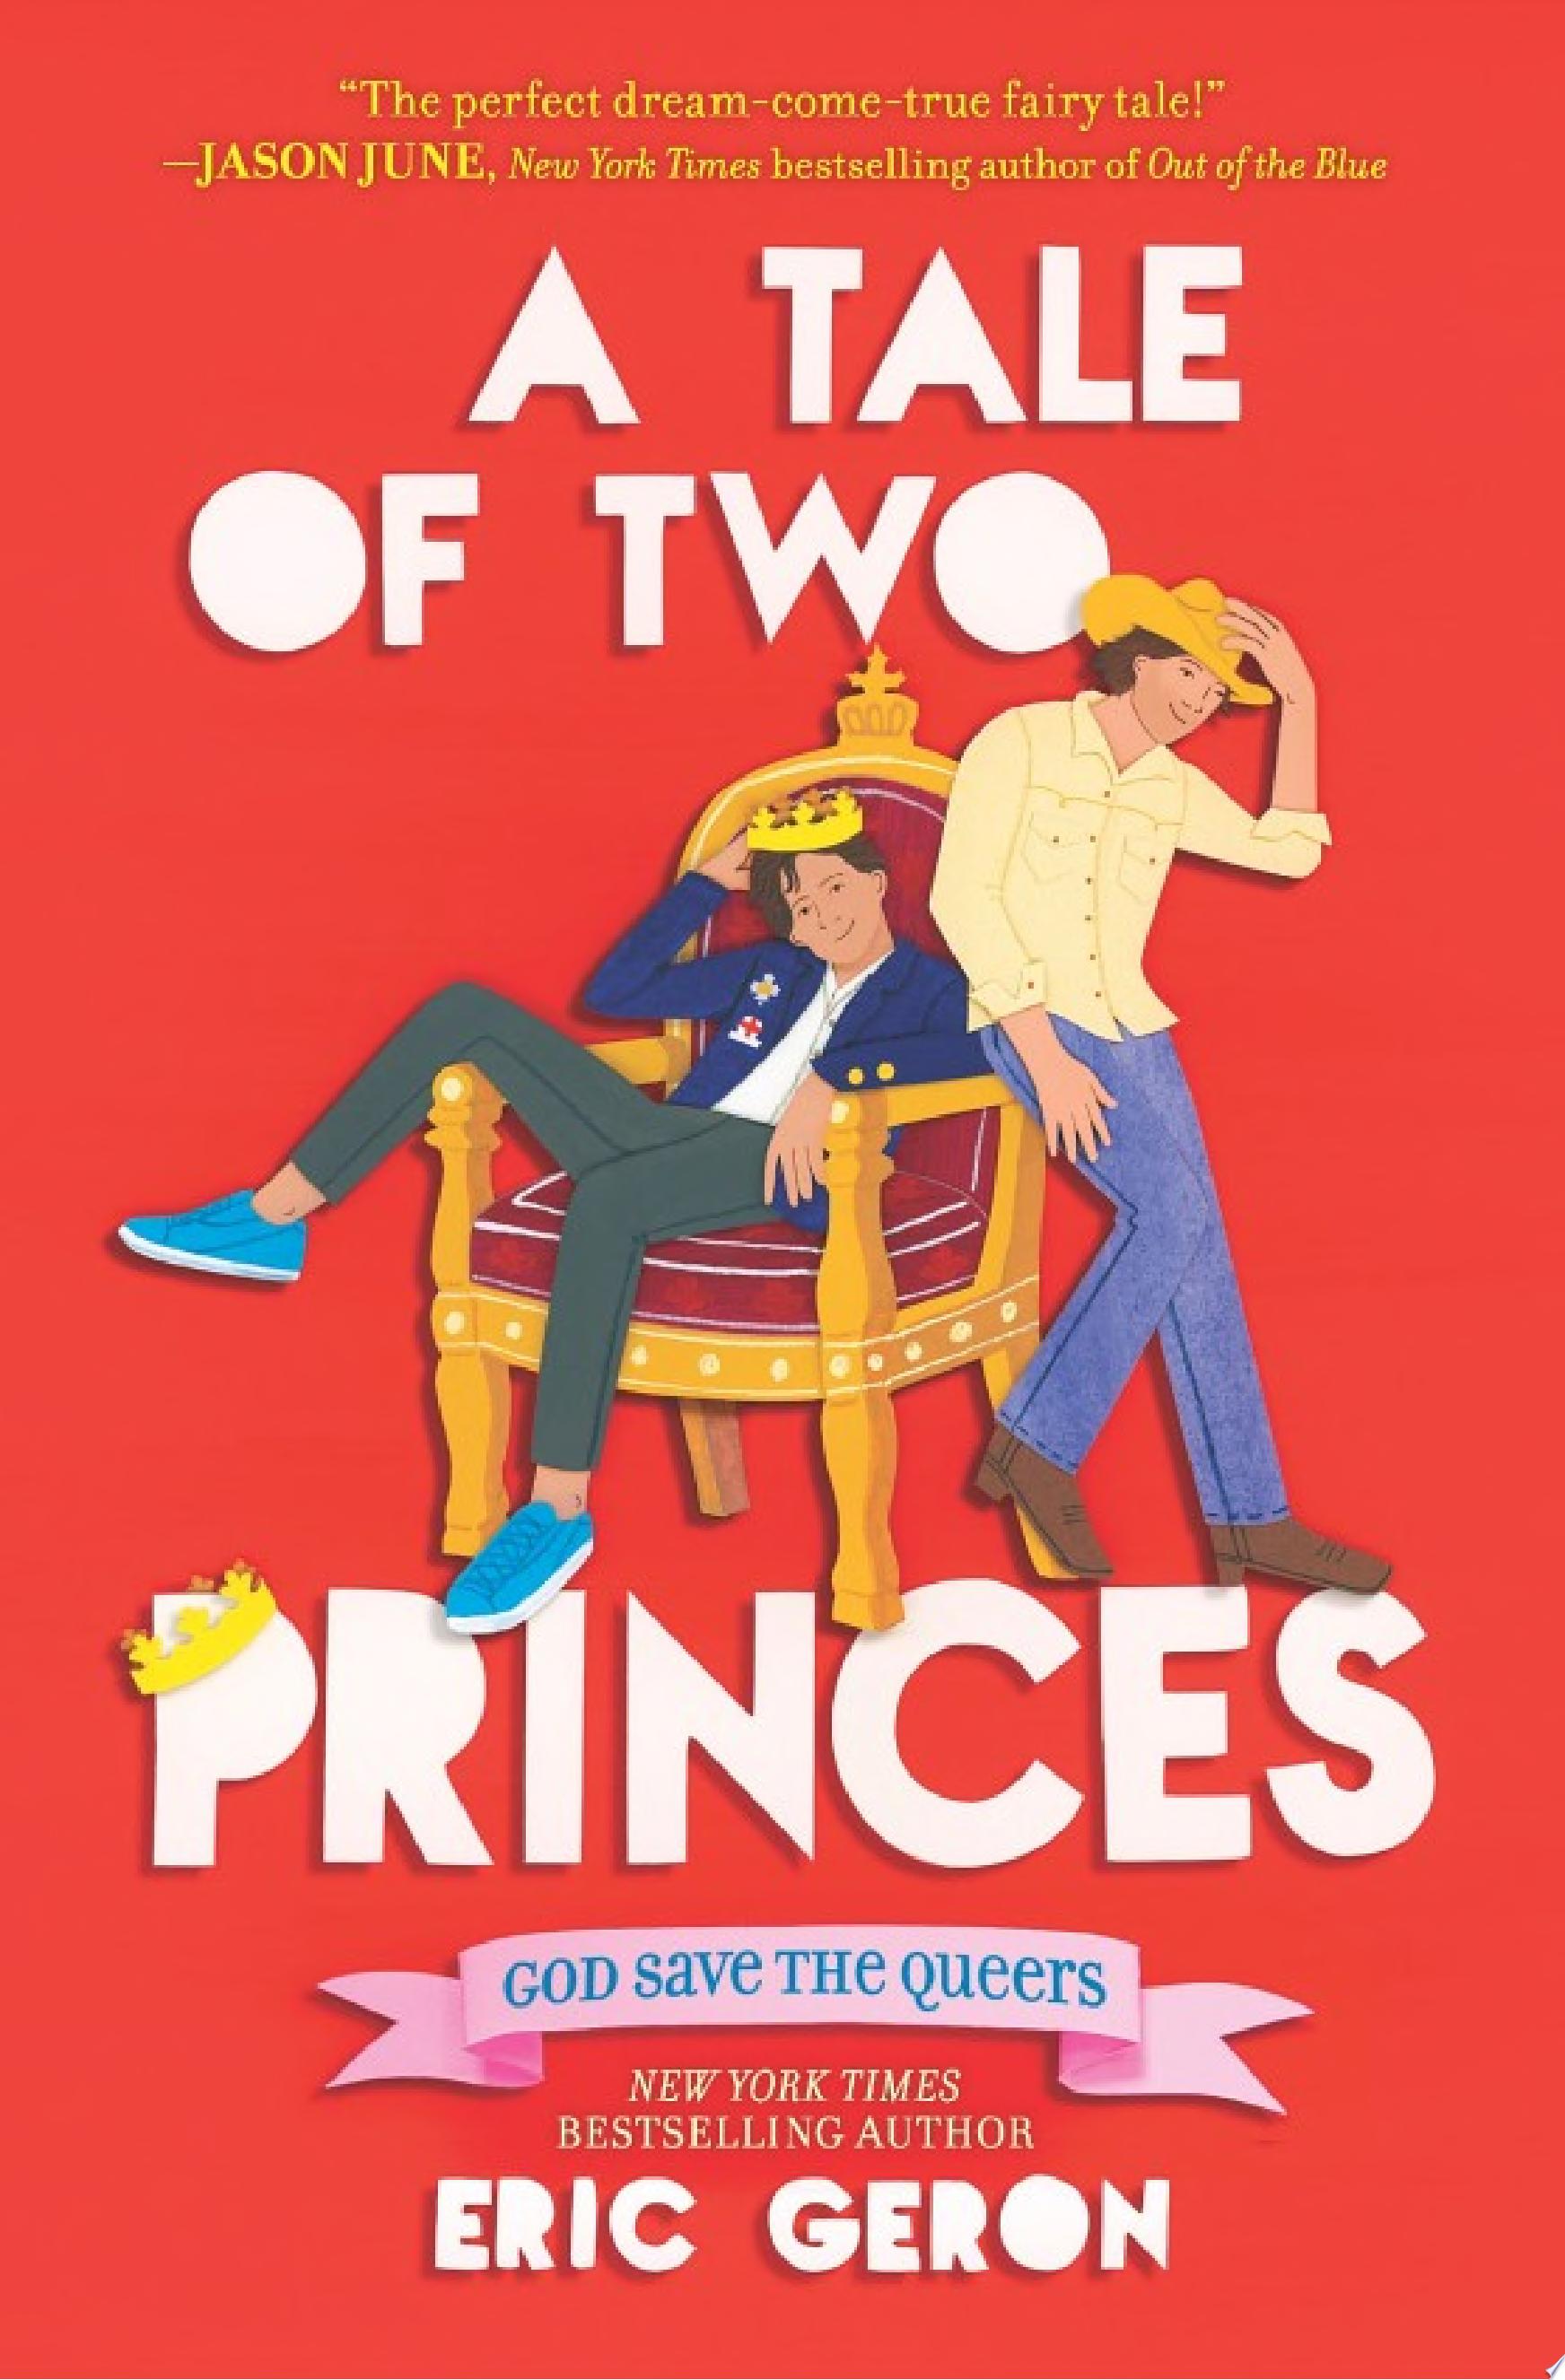 Image for "A Tale of Two Princes"